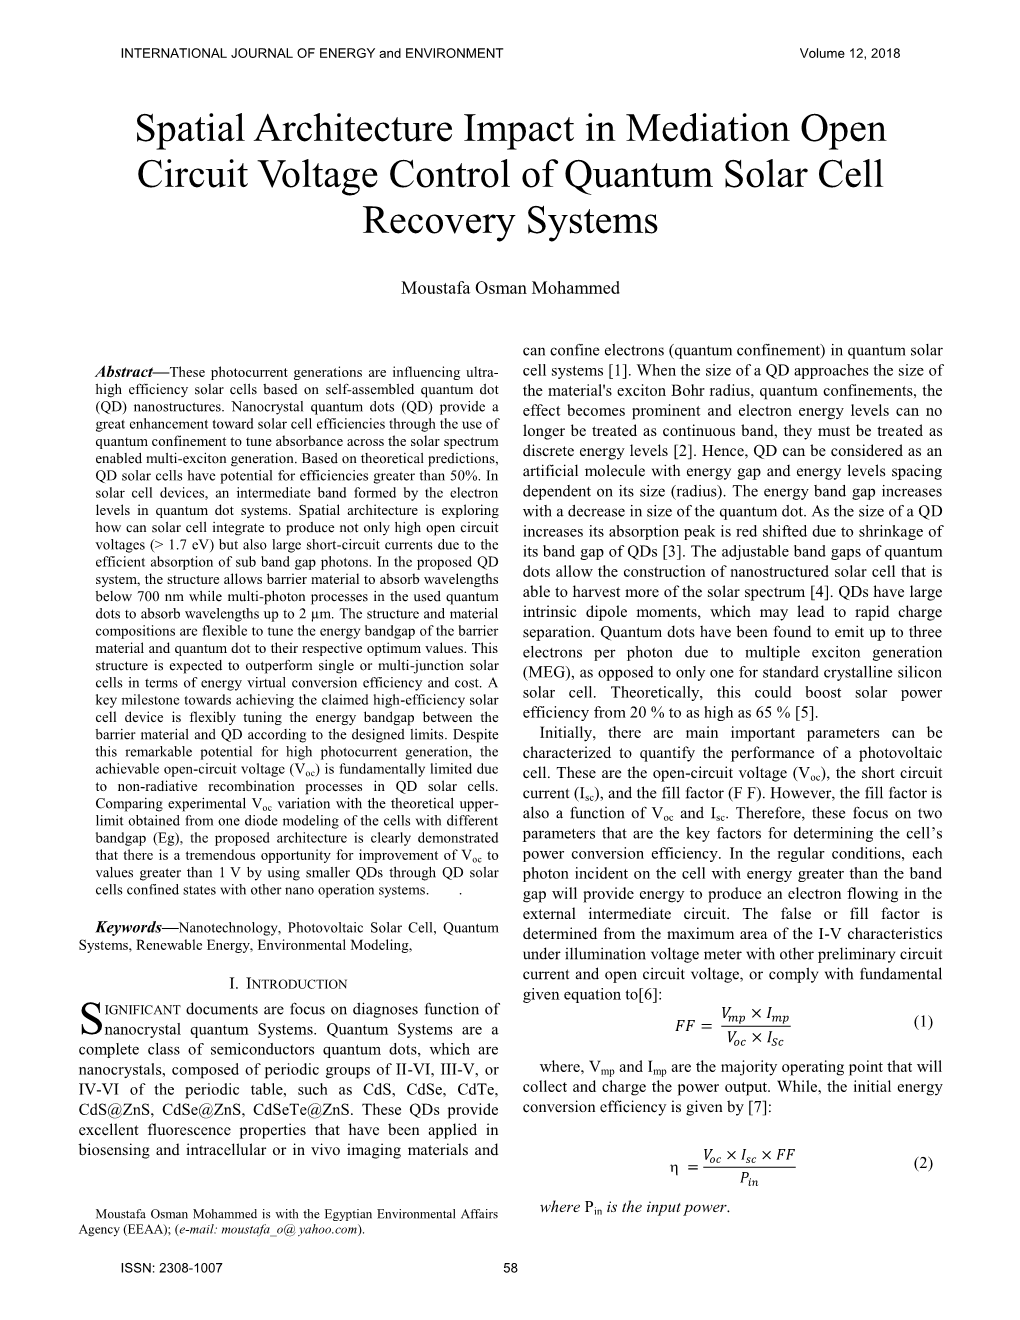 Spatial Architecture Impact in Mediation Open Circuit Voltage Control of Quantum Solar Cell Recovery Systems